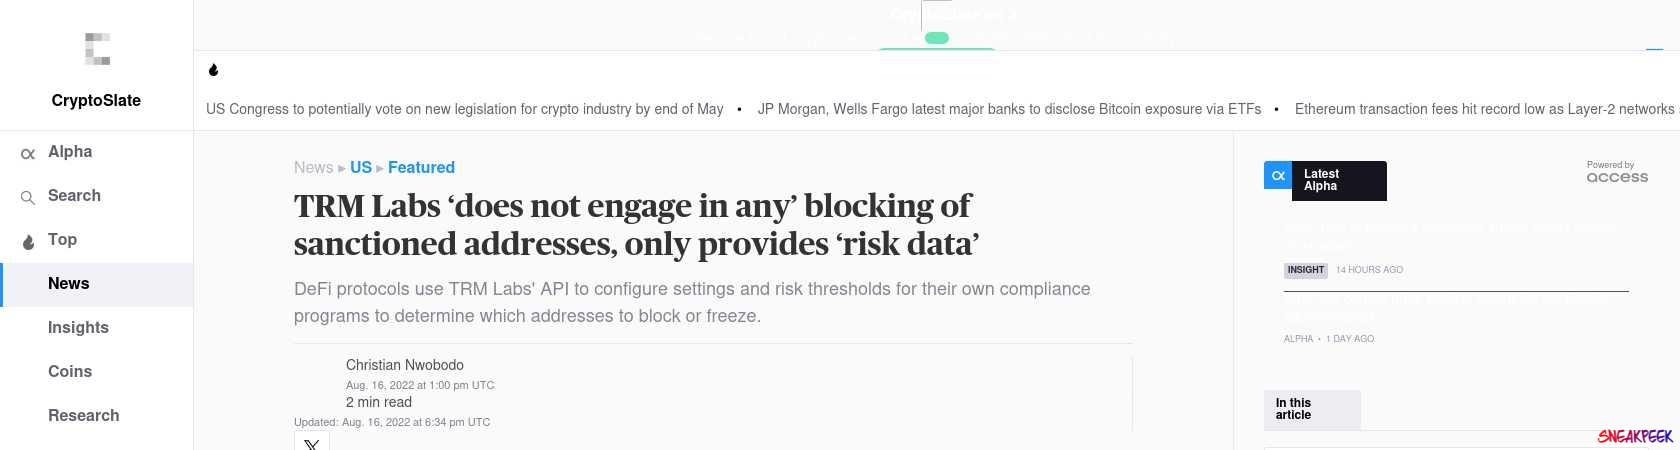 Read the full Article:  ⭲ TRM Labs ‘does not engage in any’ blocking of sanctioned addresses, only provides ‘risk data’